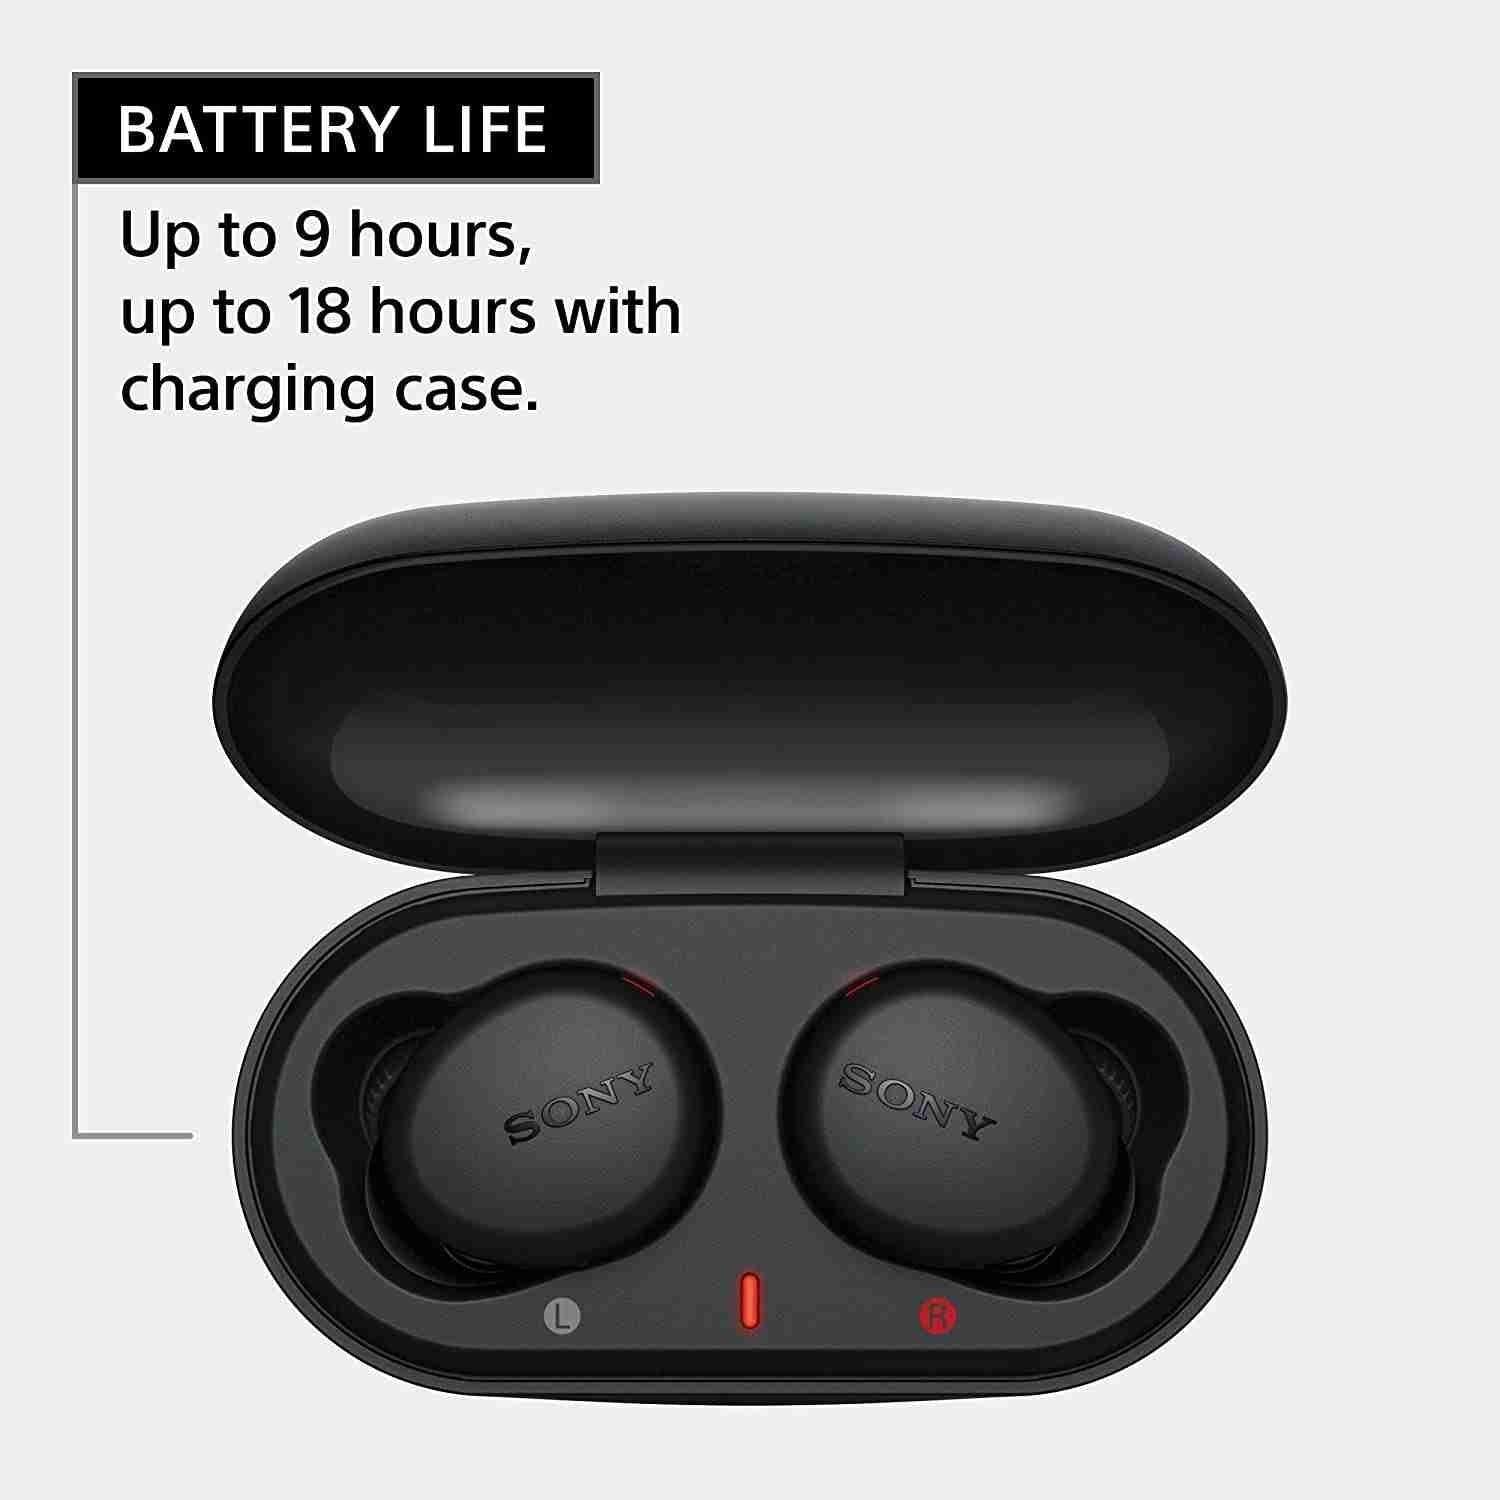 Sony WF-C700N Truly Wireless Noise Canceling in-Ear Bluetooth Earbud  Headphones with Mic and IPX4 Water Resistance, Black (Renewed)